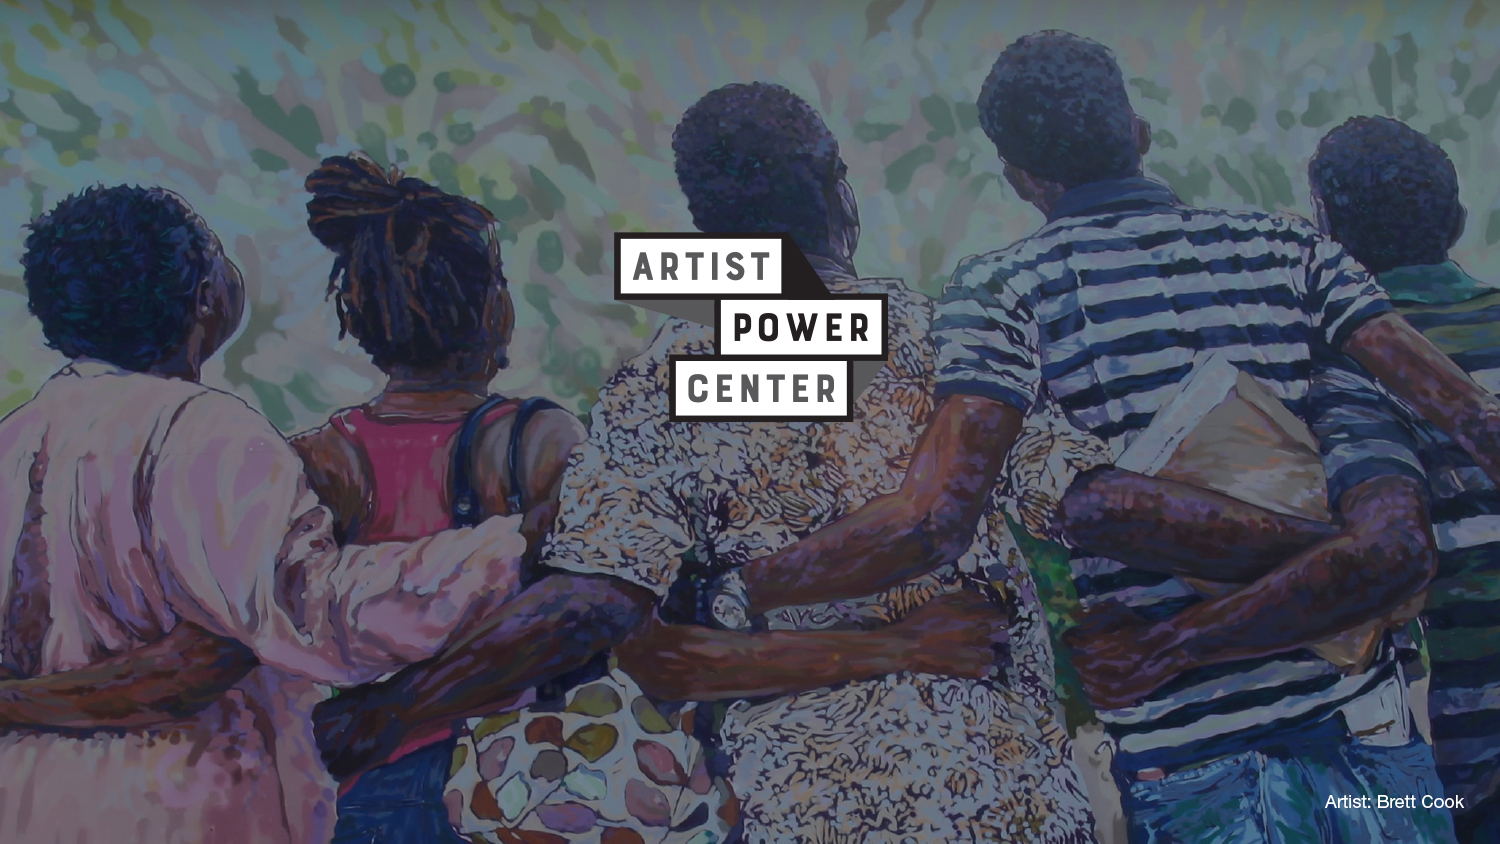 Yerba Buena Center for the Arts' Artist Power Center, a web and hotline resource, received additional funding from the SFAC to expand its reach in 2021.